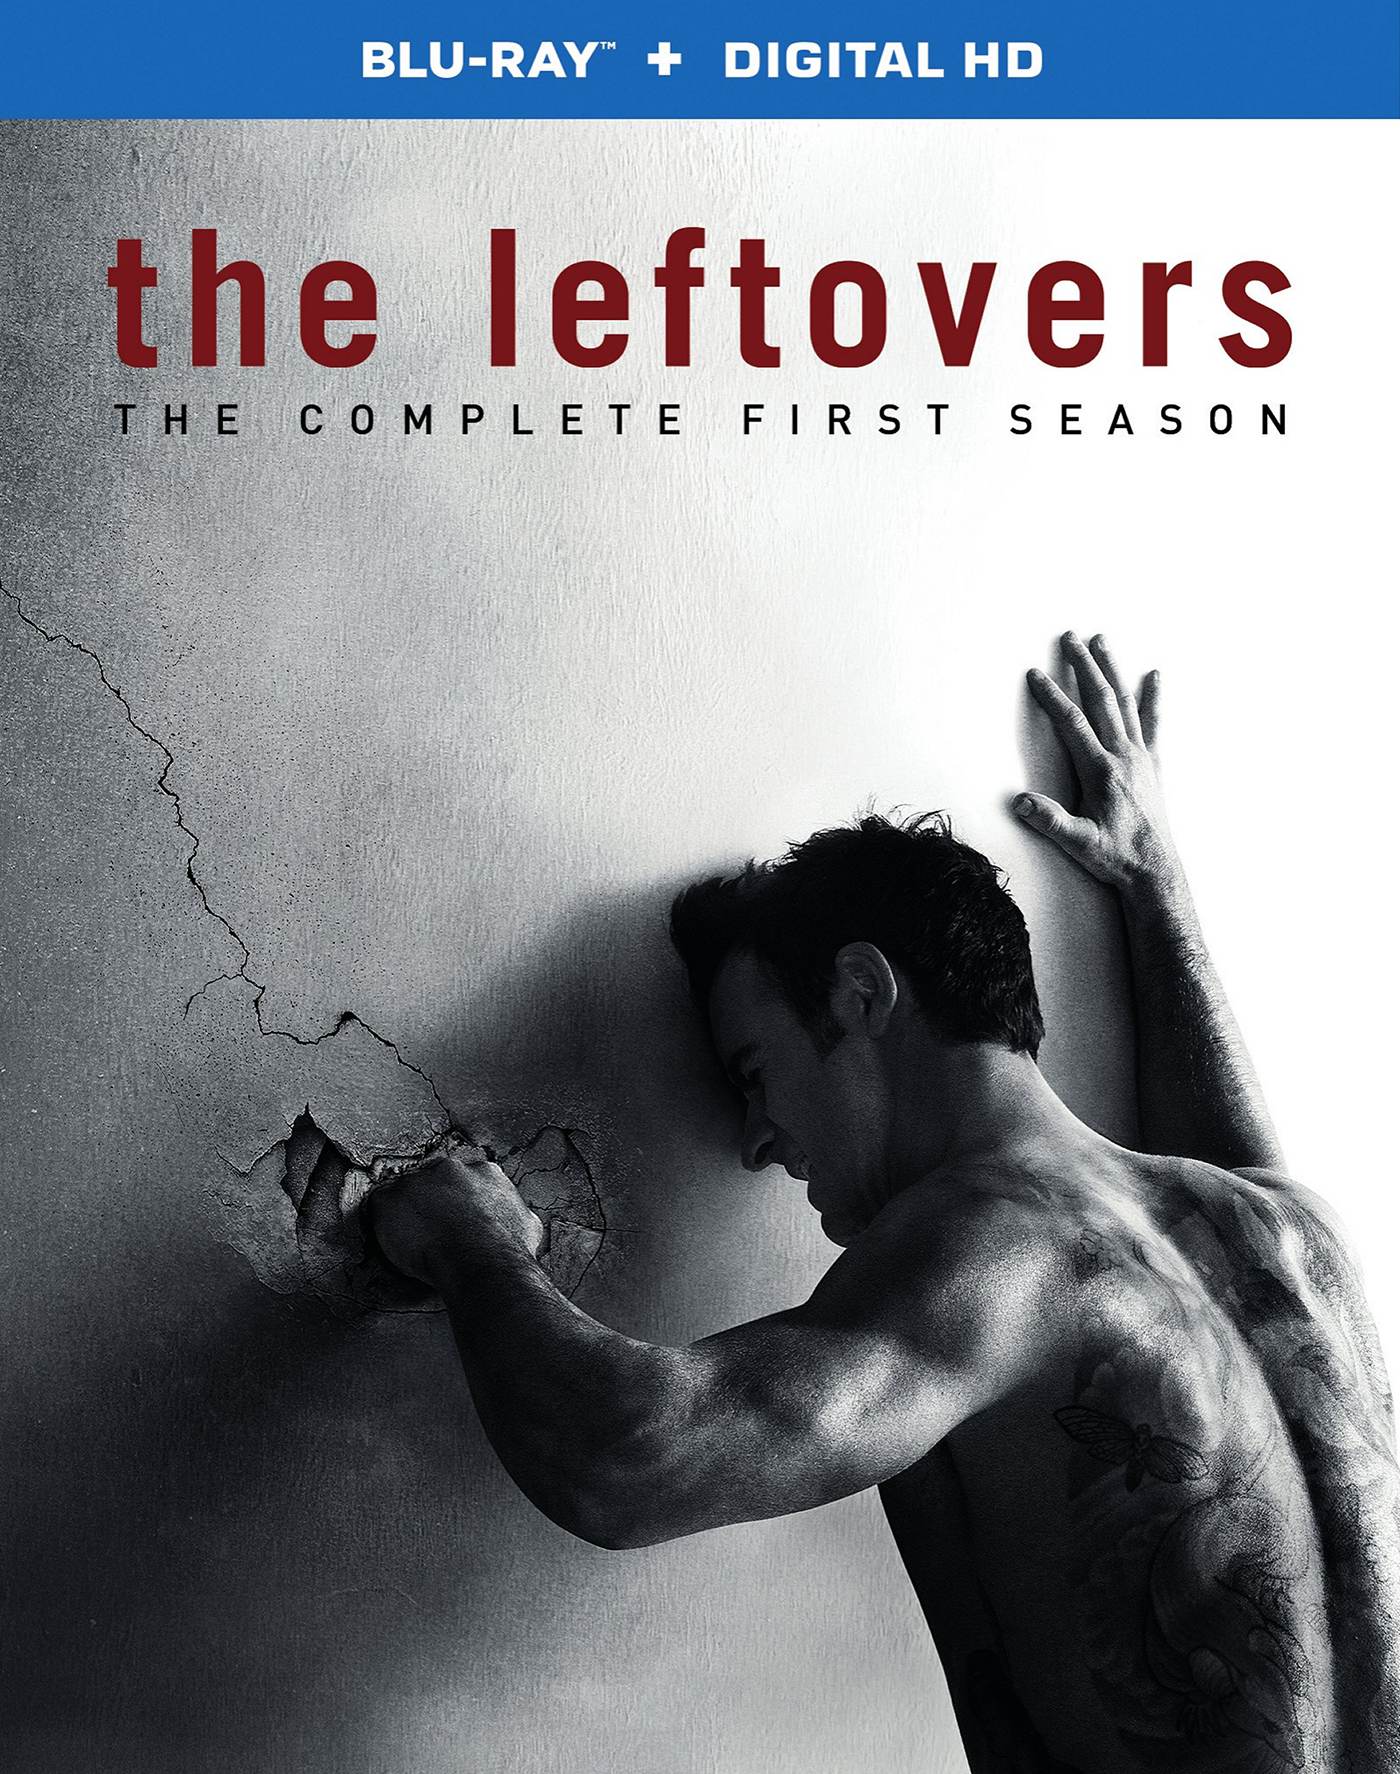 The Leftovers The Complete First Season Blu Ray Review Flickdirect